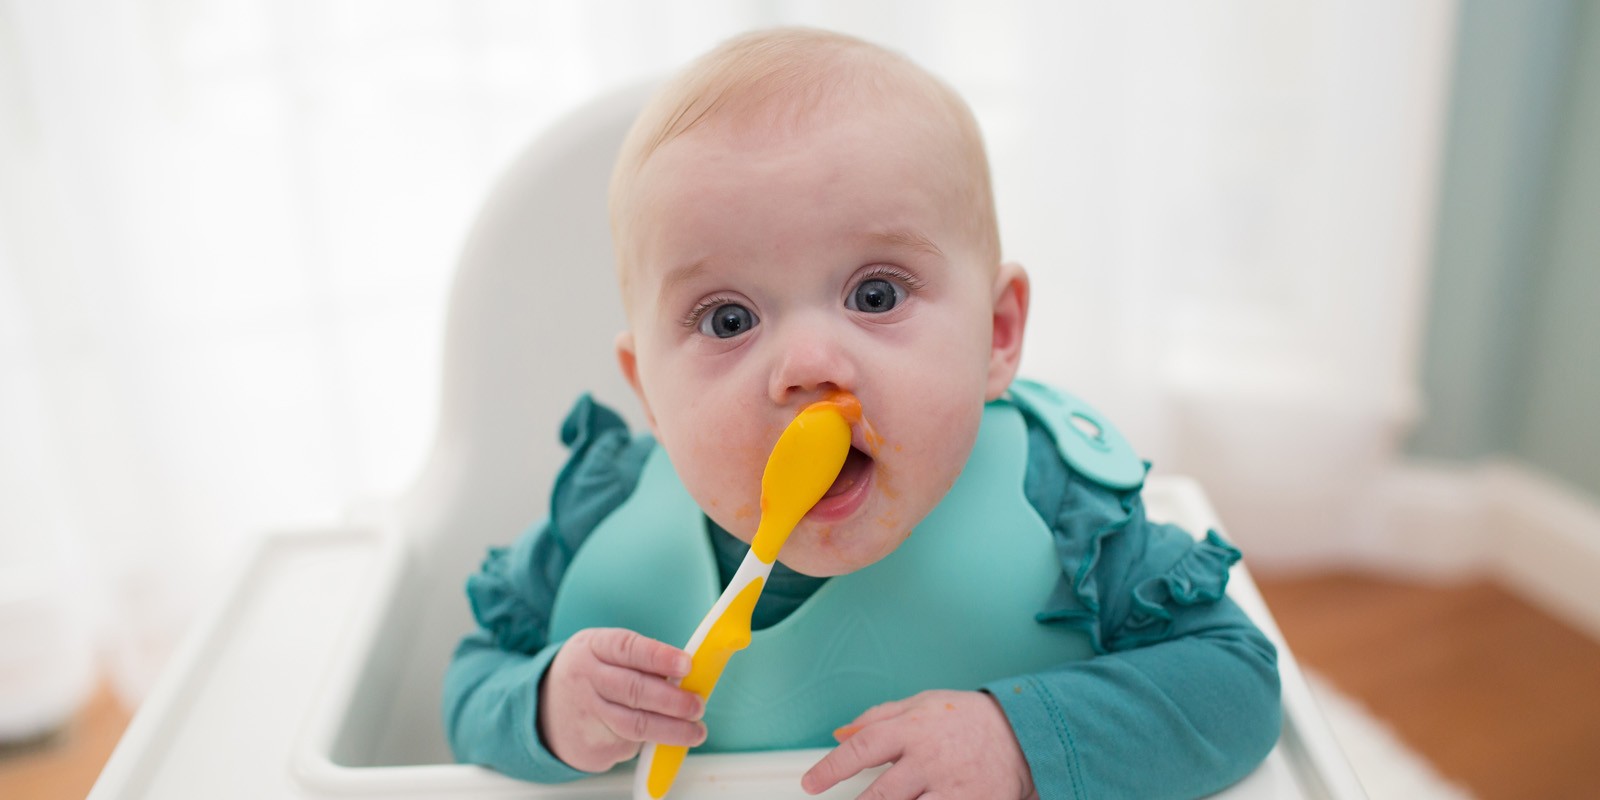 https://www.drbrownsbaby.com/wp-content/uploads/2020/04/4-30-20-Baby-holding-spoon-eating-with-bib-on-Solid-Feeding-Stages-Guide-for-Babies.jpg